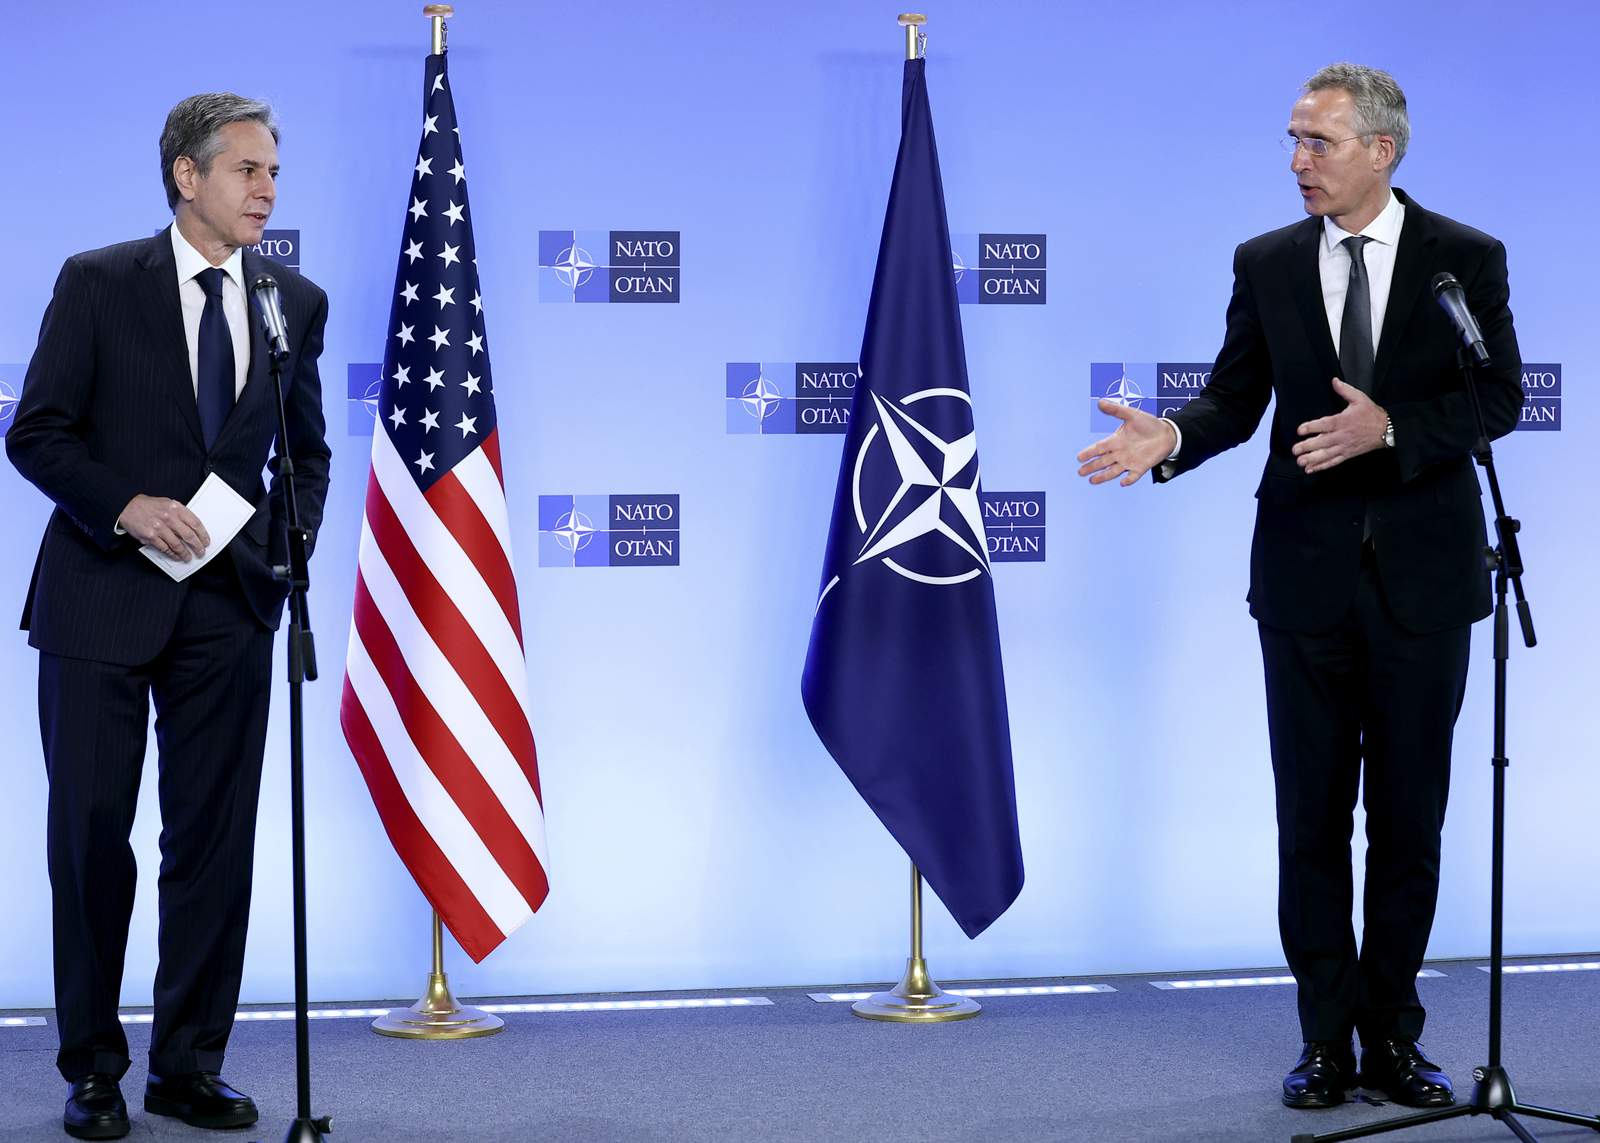 NATO to match US troop pullout from Afghanistan